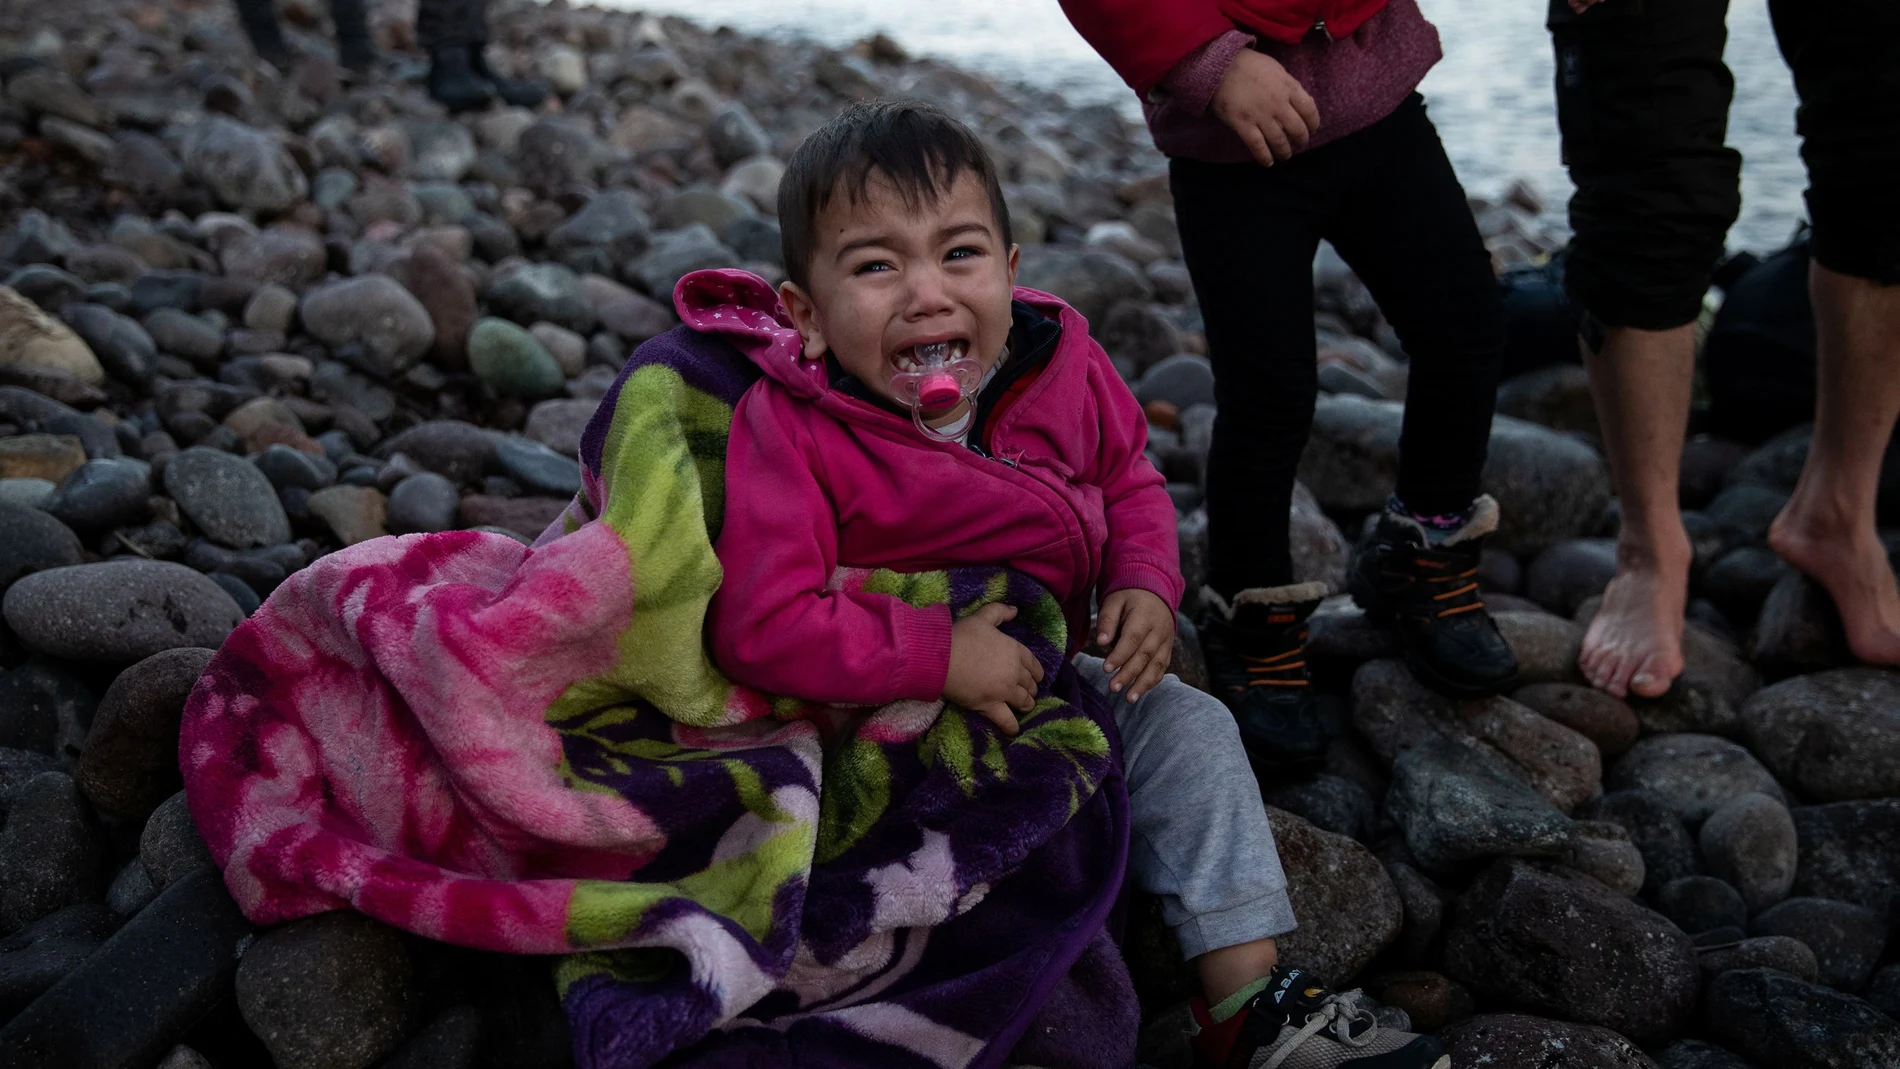 A child cries as migrants from Afghanistan arrive on a dinghy on a beach near the village of Skala Sikamias, after crossing part of the Aegean Sea from Turkey to the island of Lesbos